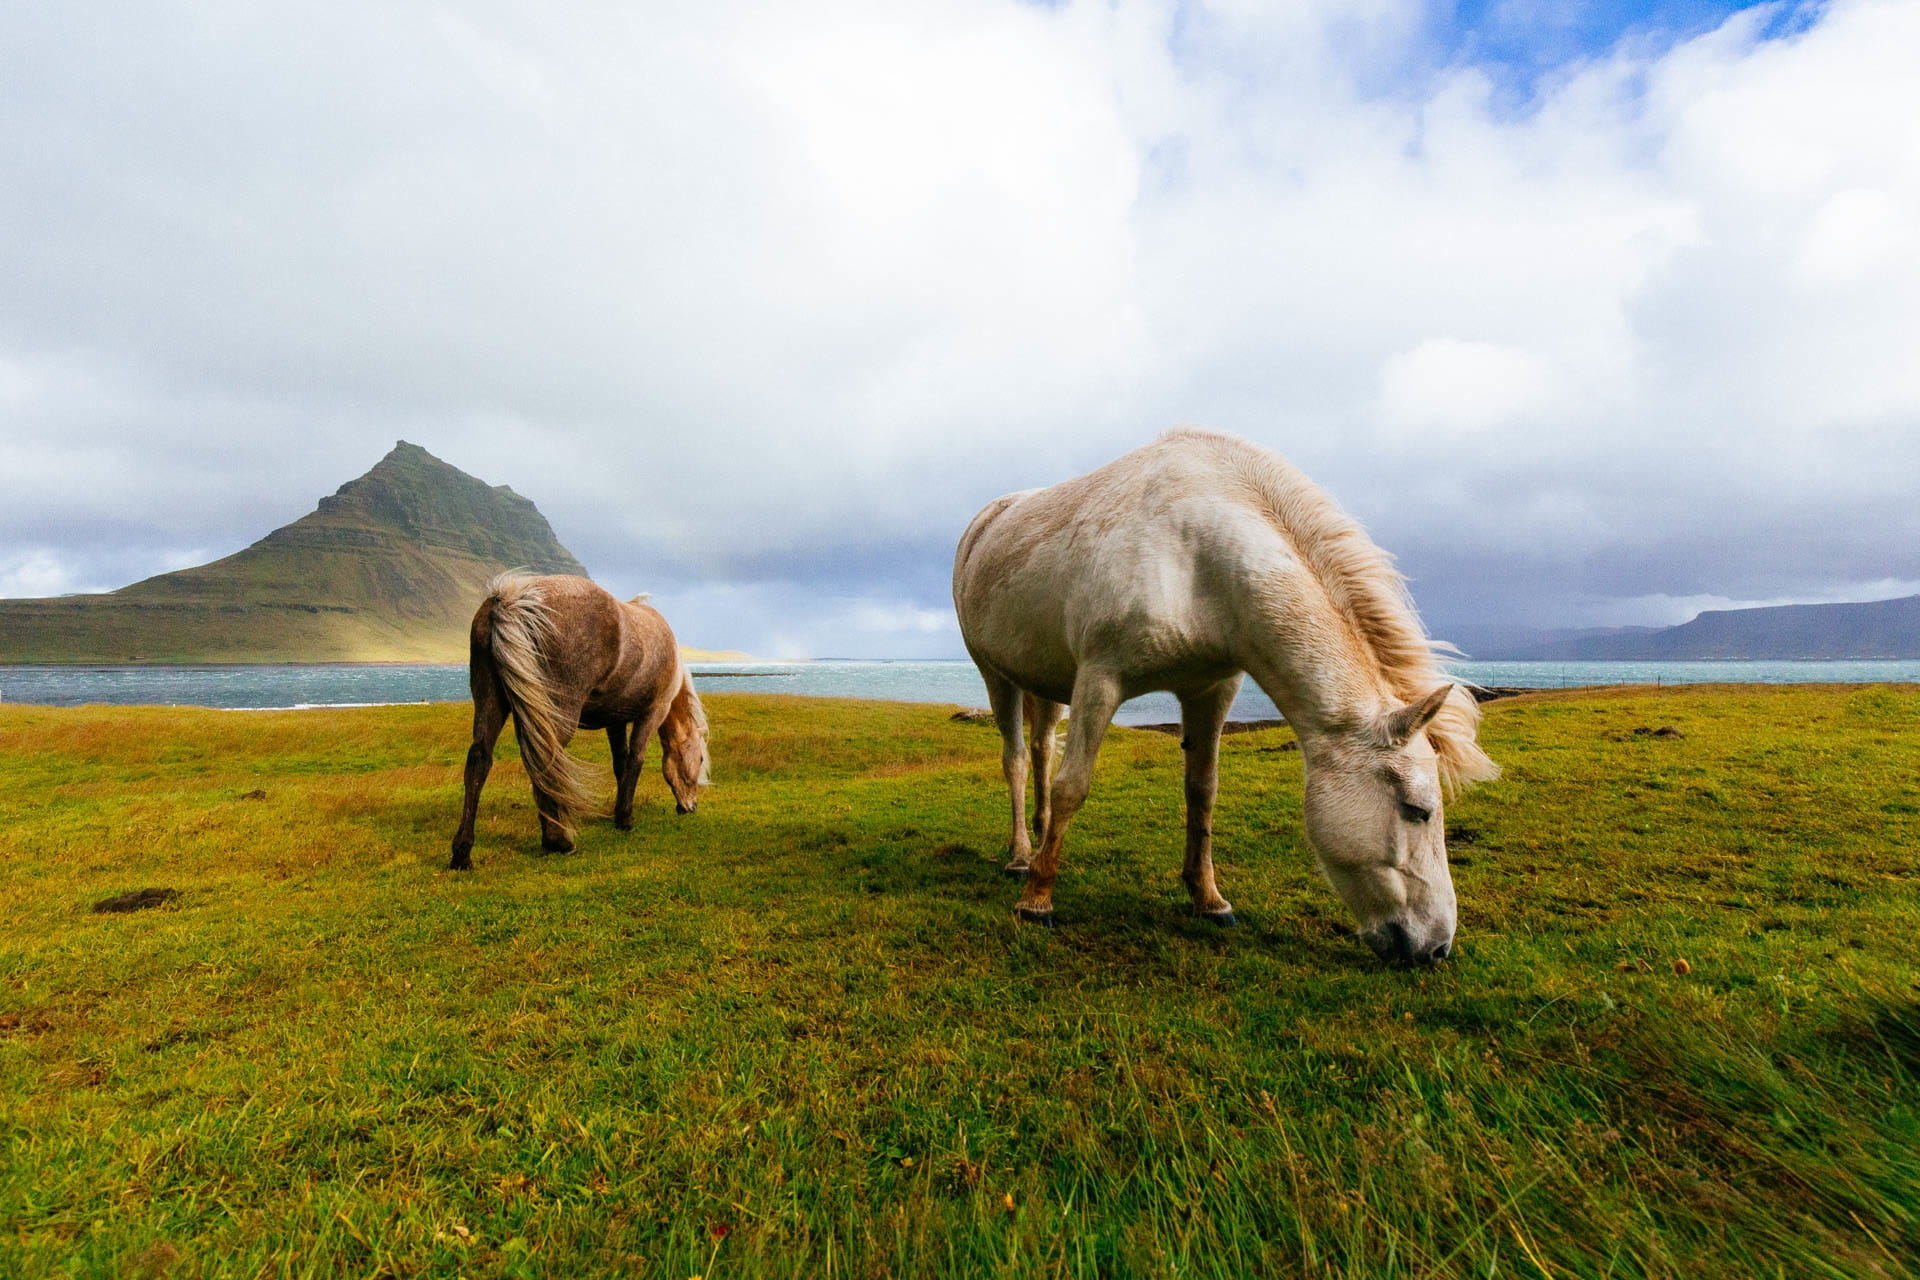 Horses in Iceland, 